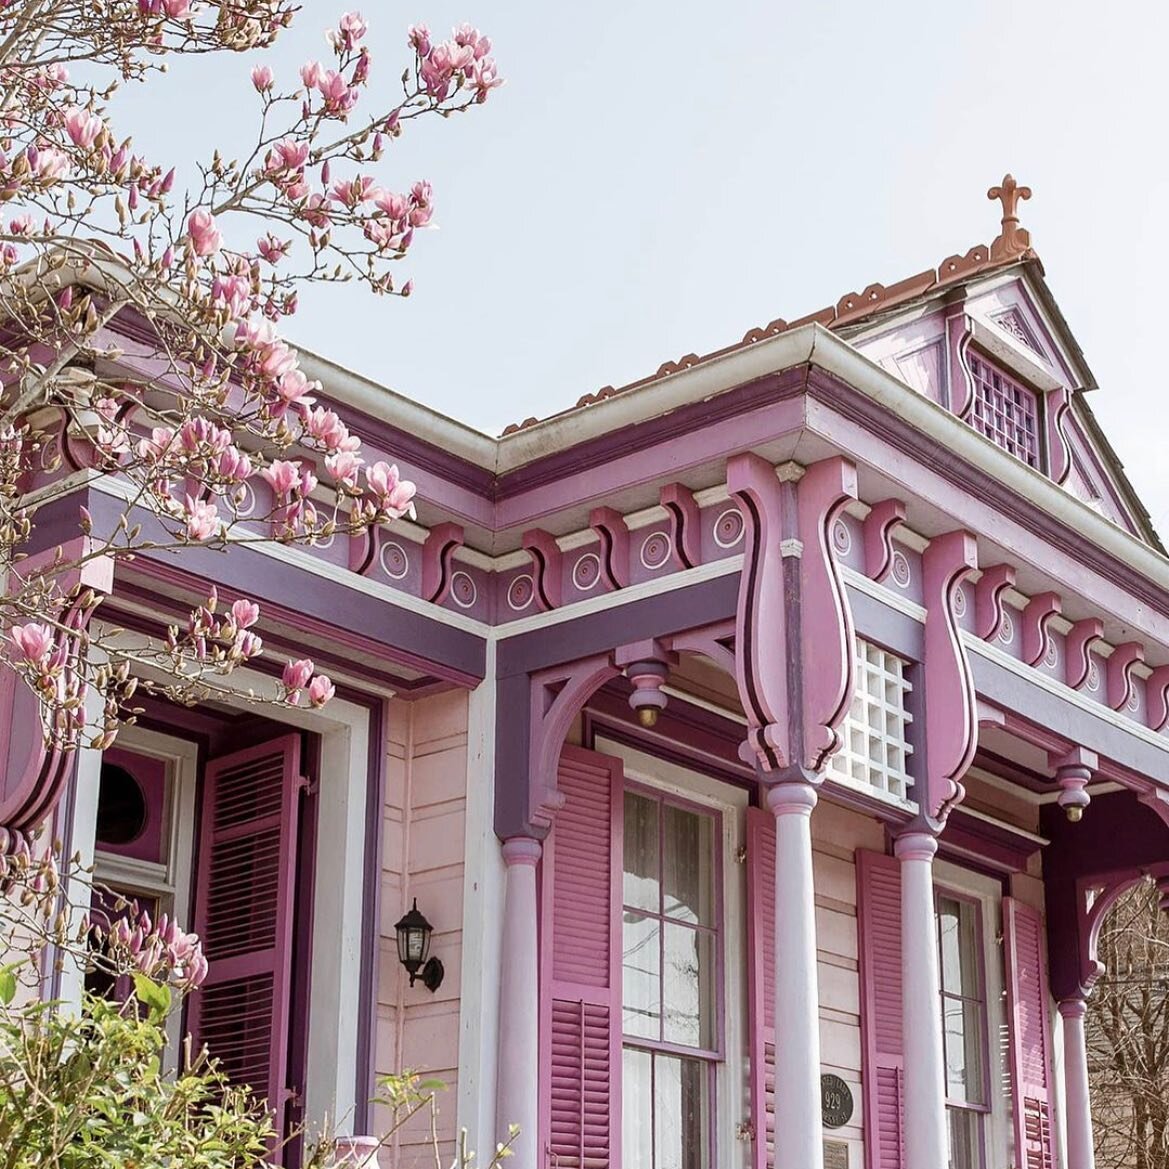 Obsessed with this little pink NOLA house! 

📷: @nola_val - if you&rsquo;re not already, you need to follow Val, her photos are incredible!

#neworleans #nola #dreamholiday #travel #travelgoals #nolalife #vaction #architecturedetail #oldbuildings #n